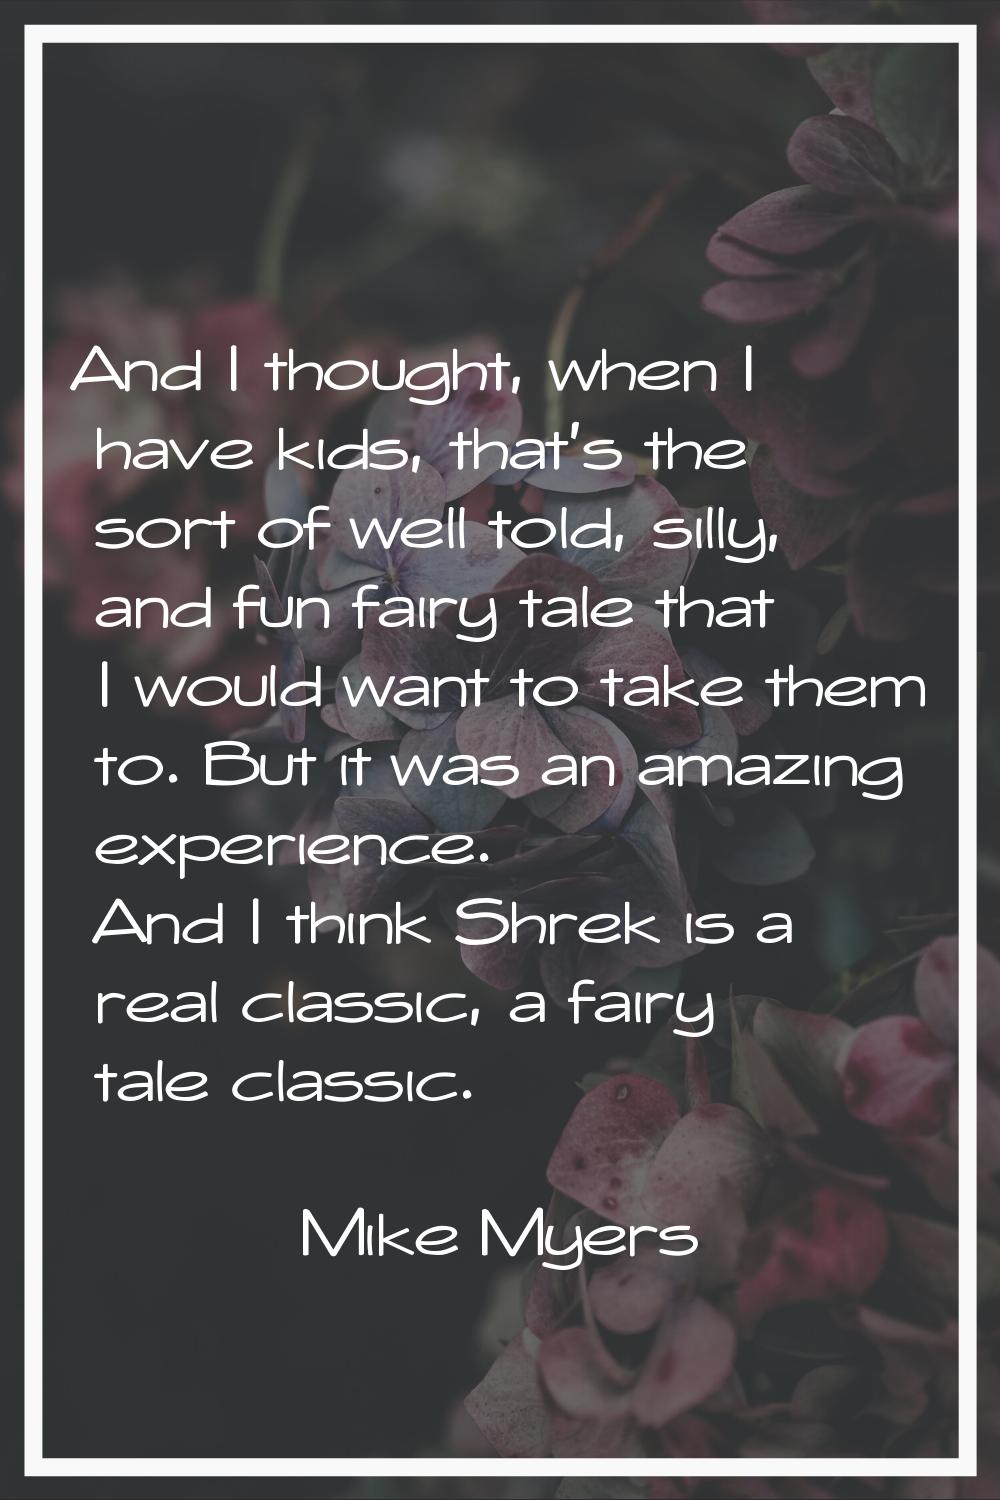 And I thought, when I have kids, that's the sort of well told, silly, and fun fairy tale that I wou